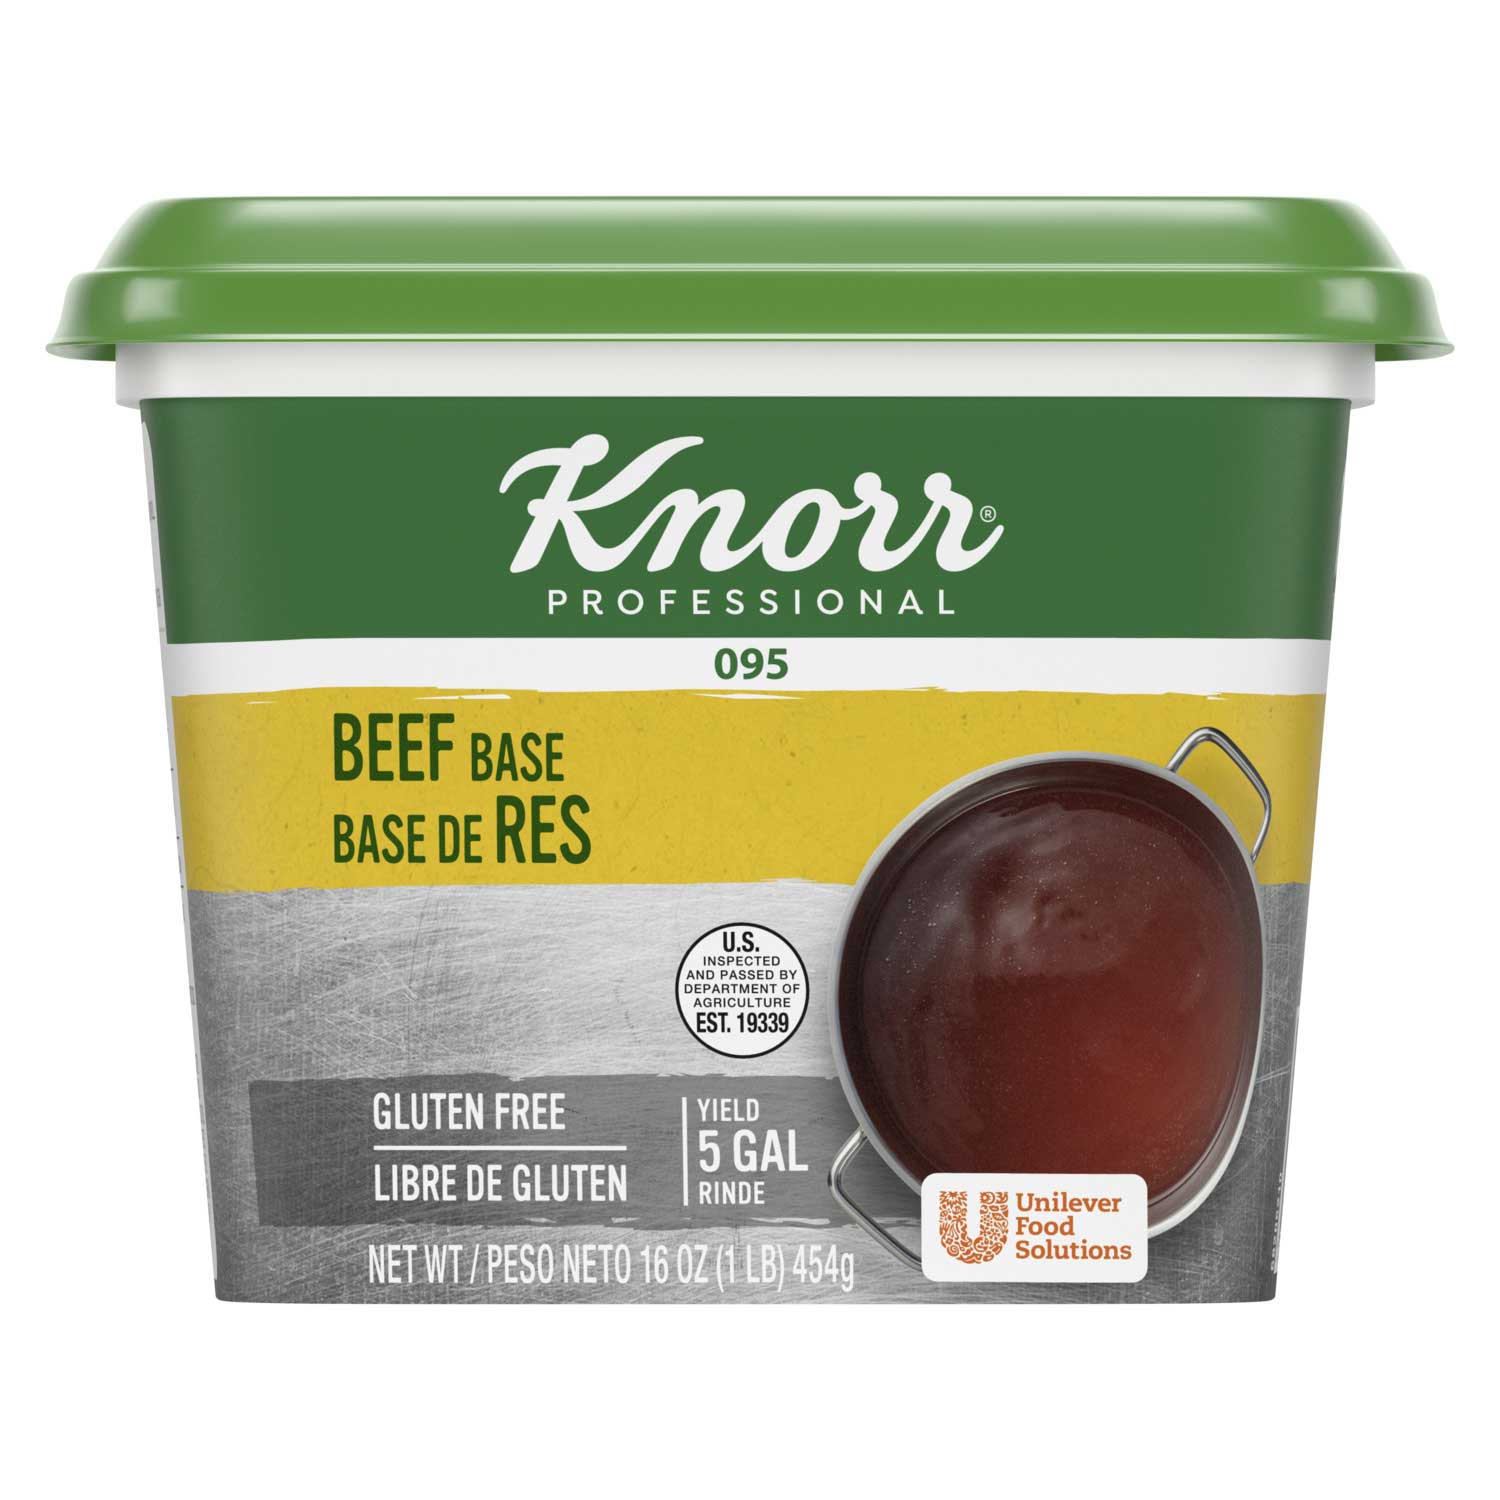 Knorr Professional 095 Beef Stock Base, 1 pound -- 12 per case